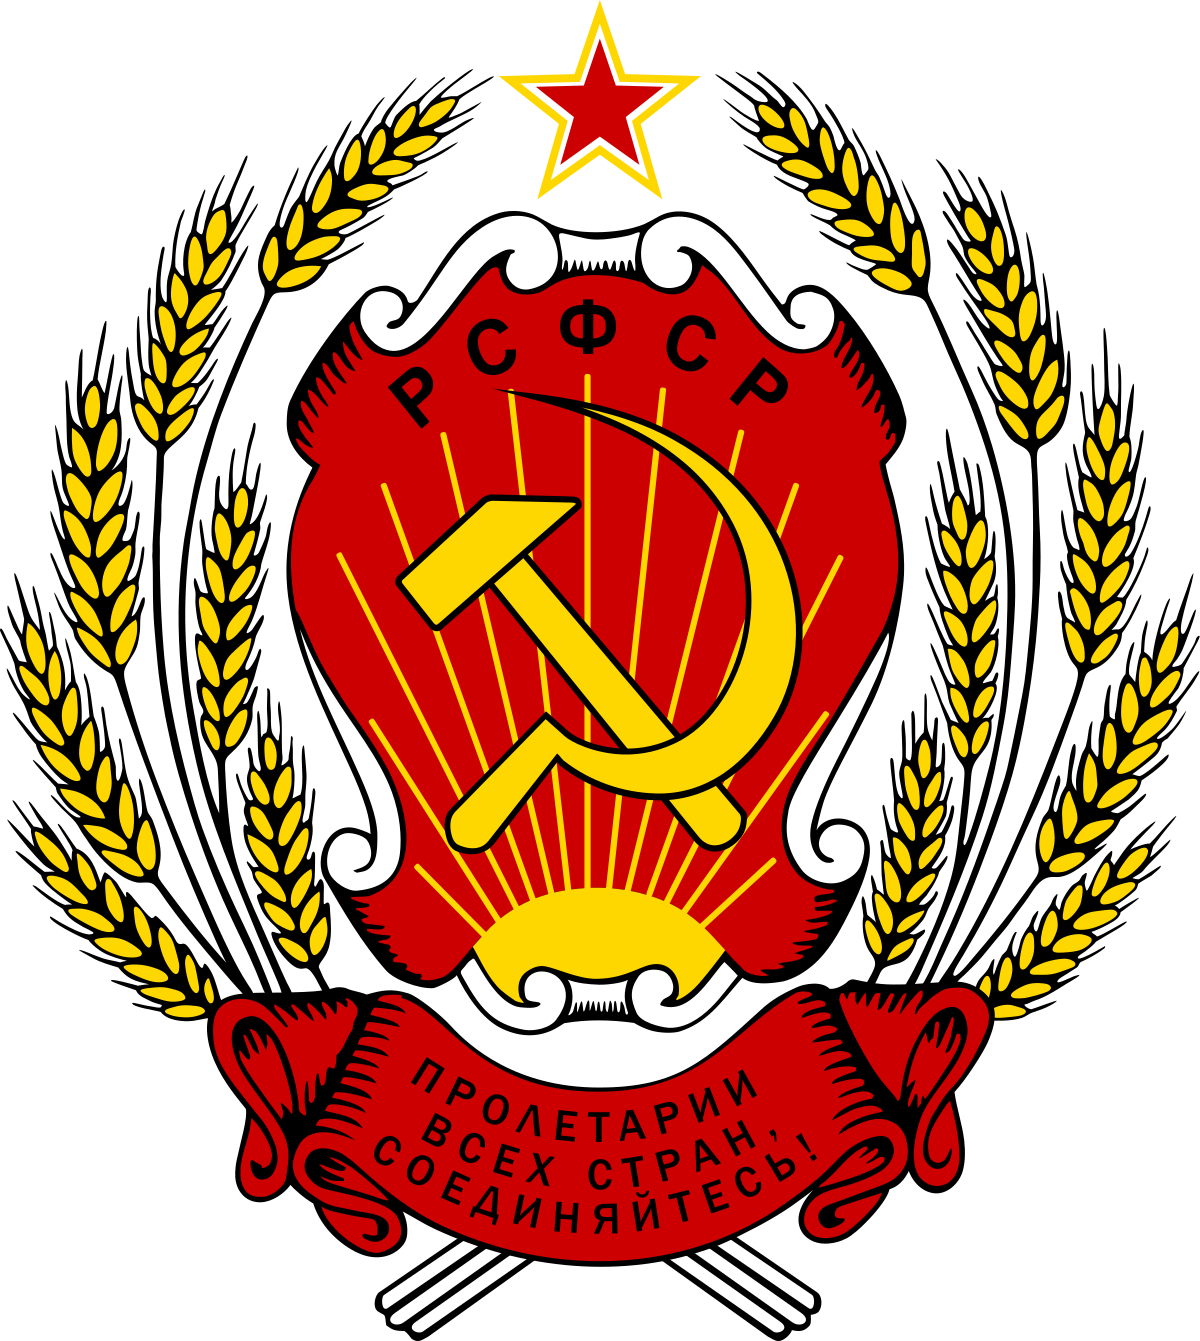 1200px-Coat_of_arms_of_the_Russian_Soviet_Federative_Socialist_Republic.svg.png